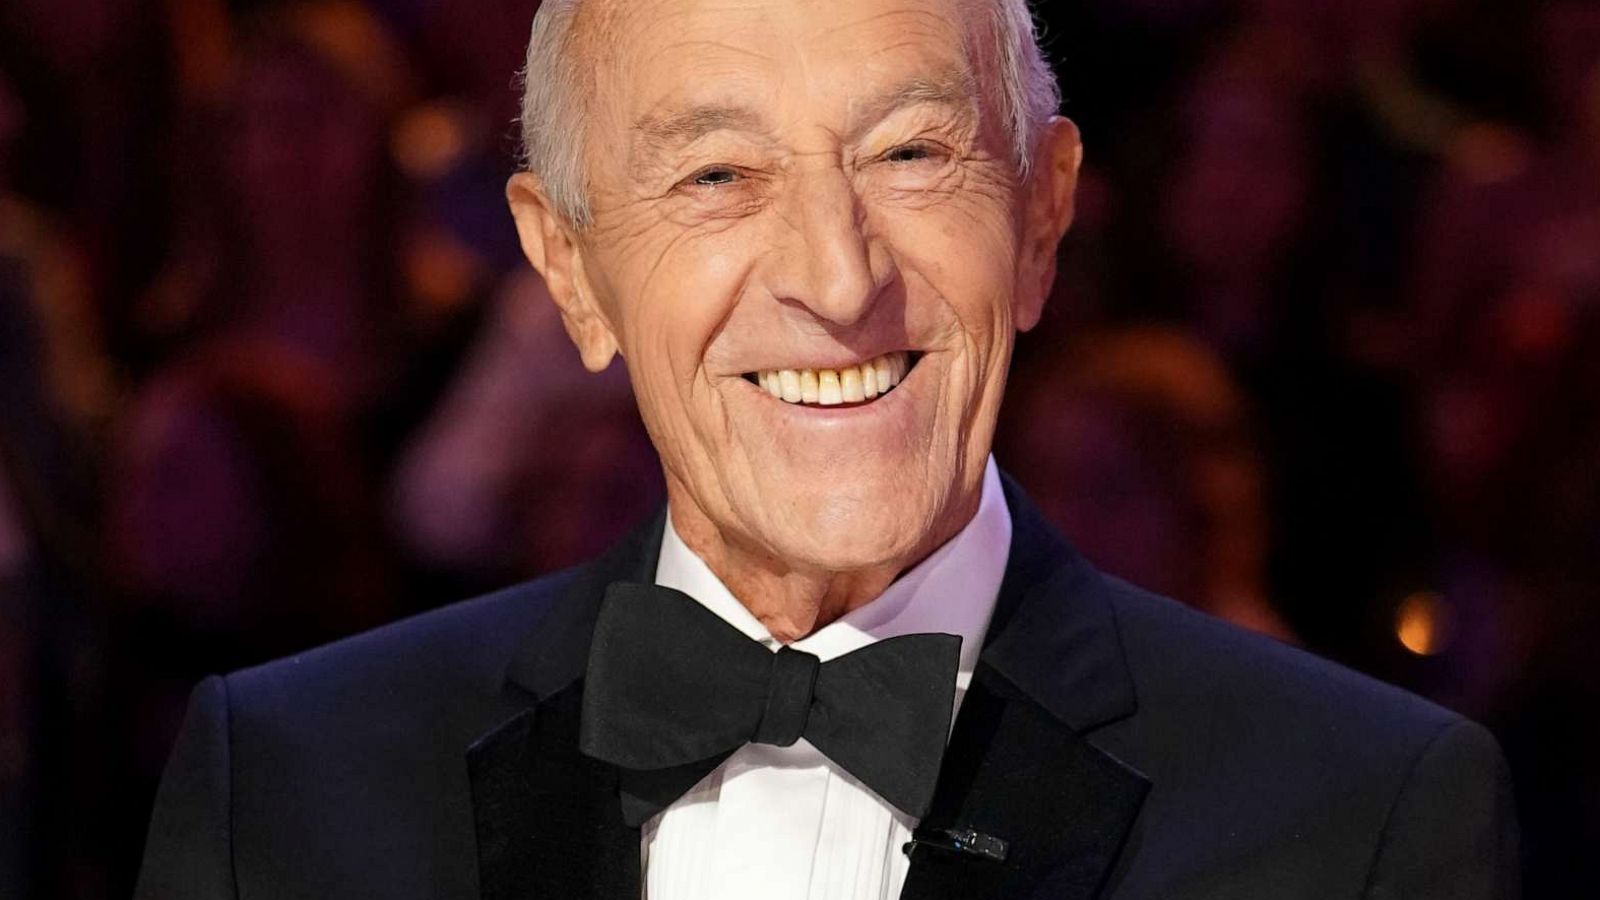 PHOTO: Len Goodman pictured on the season 31 finale of "Dancing with the Stars", Nov. 21, 2022.